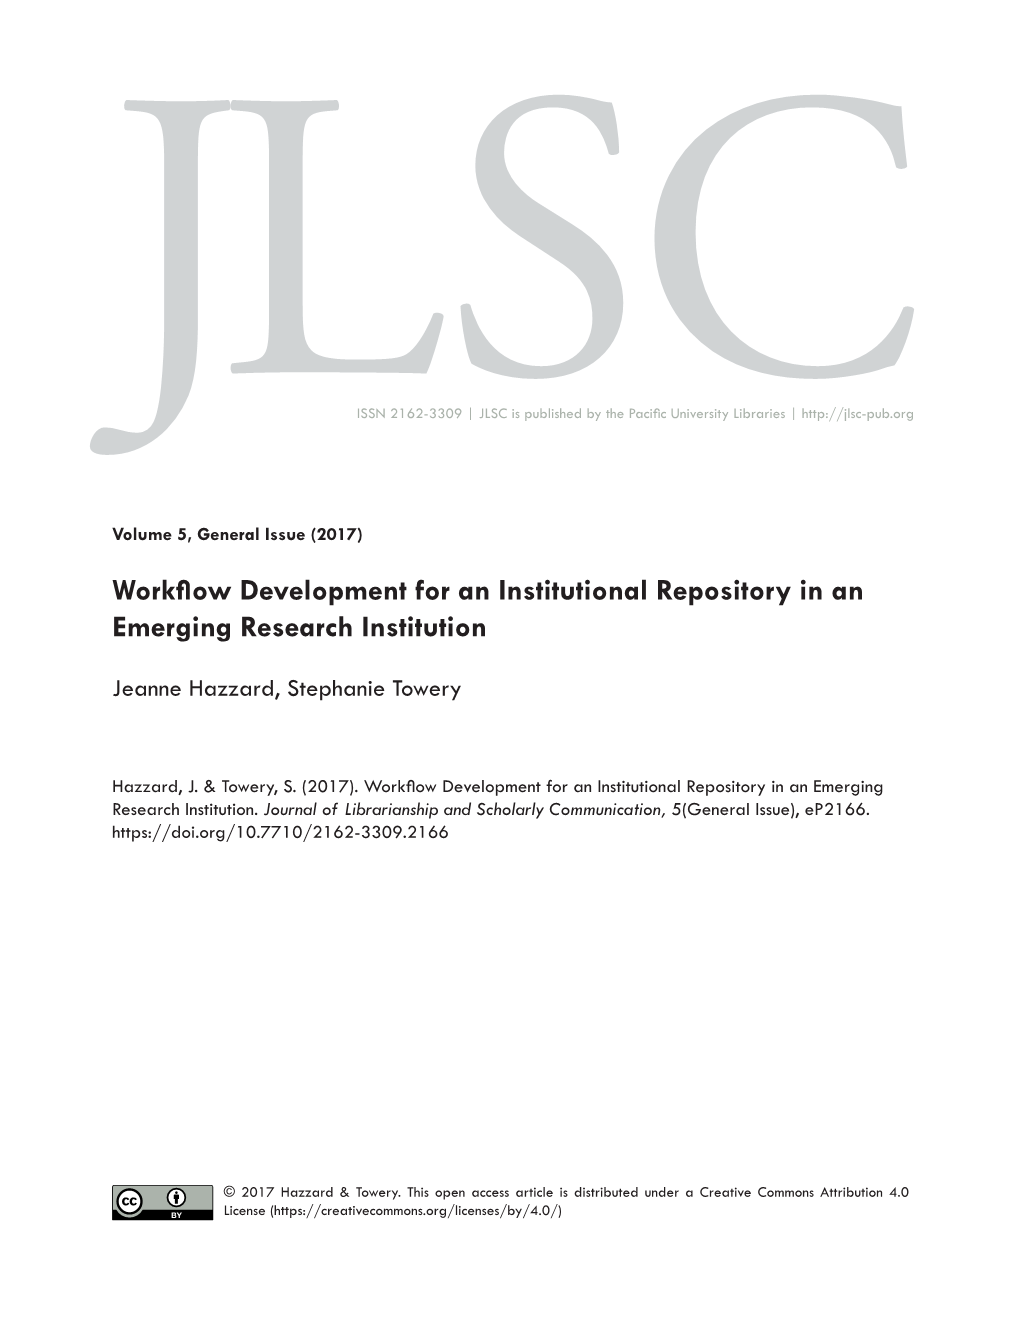 Workflow Development for an Institutional Repository in an Emerging Research Institution